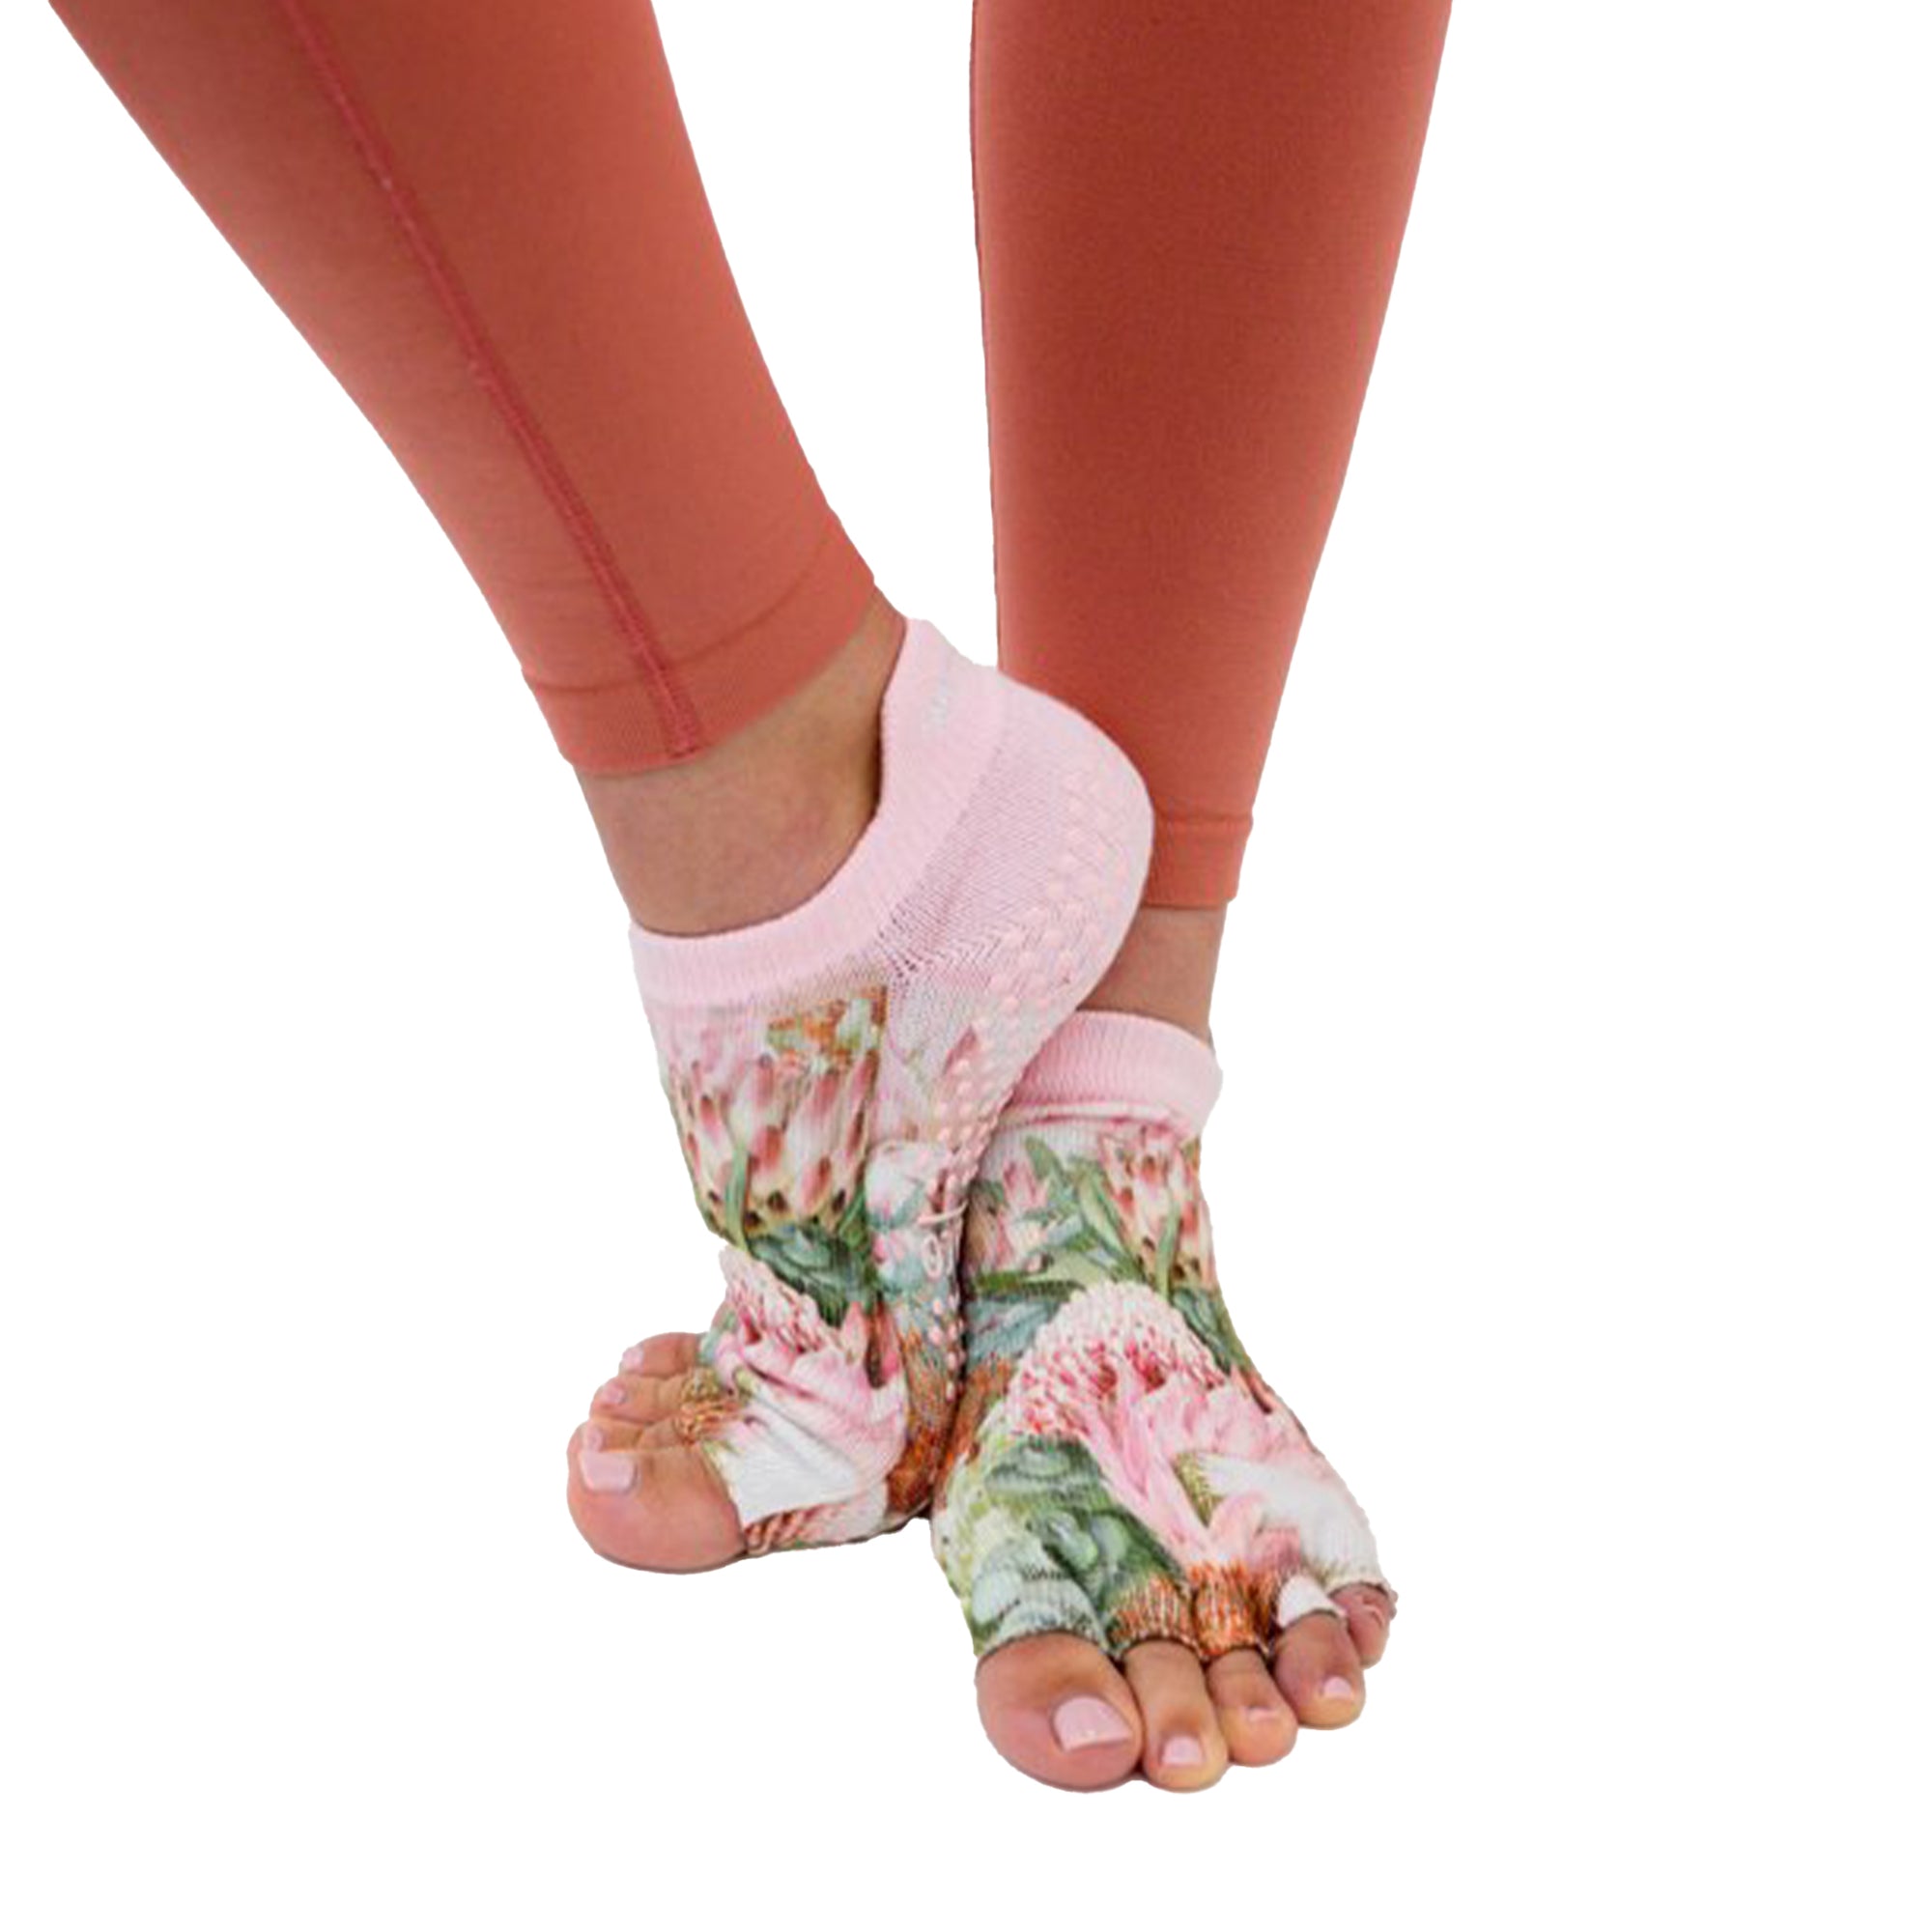 Shop Grip Socks  New Designs and Styles - SOCK IT AND CO.®